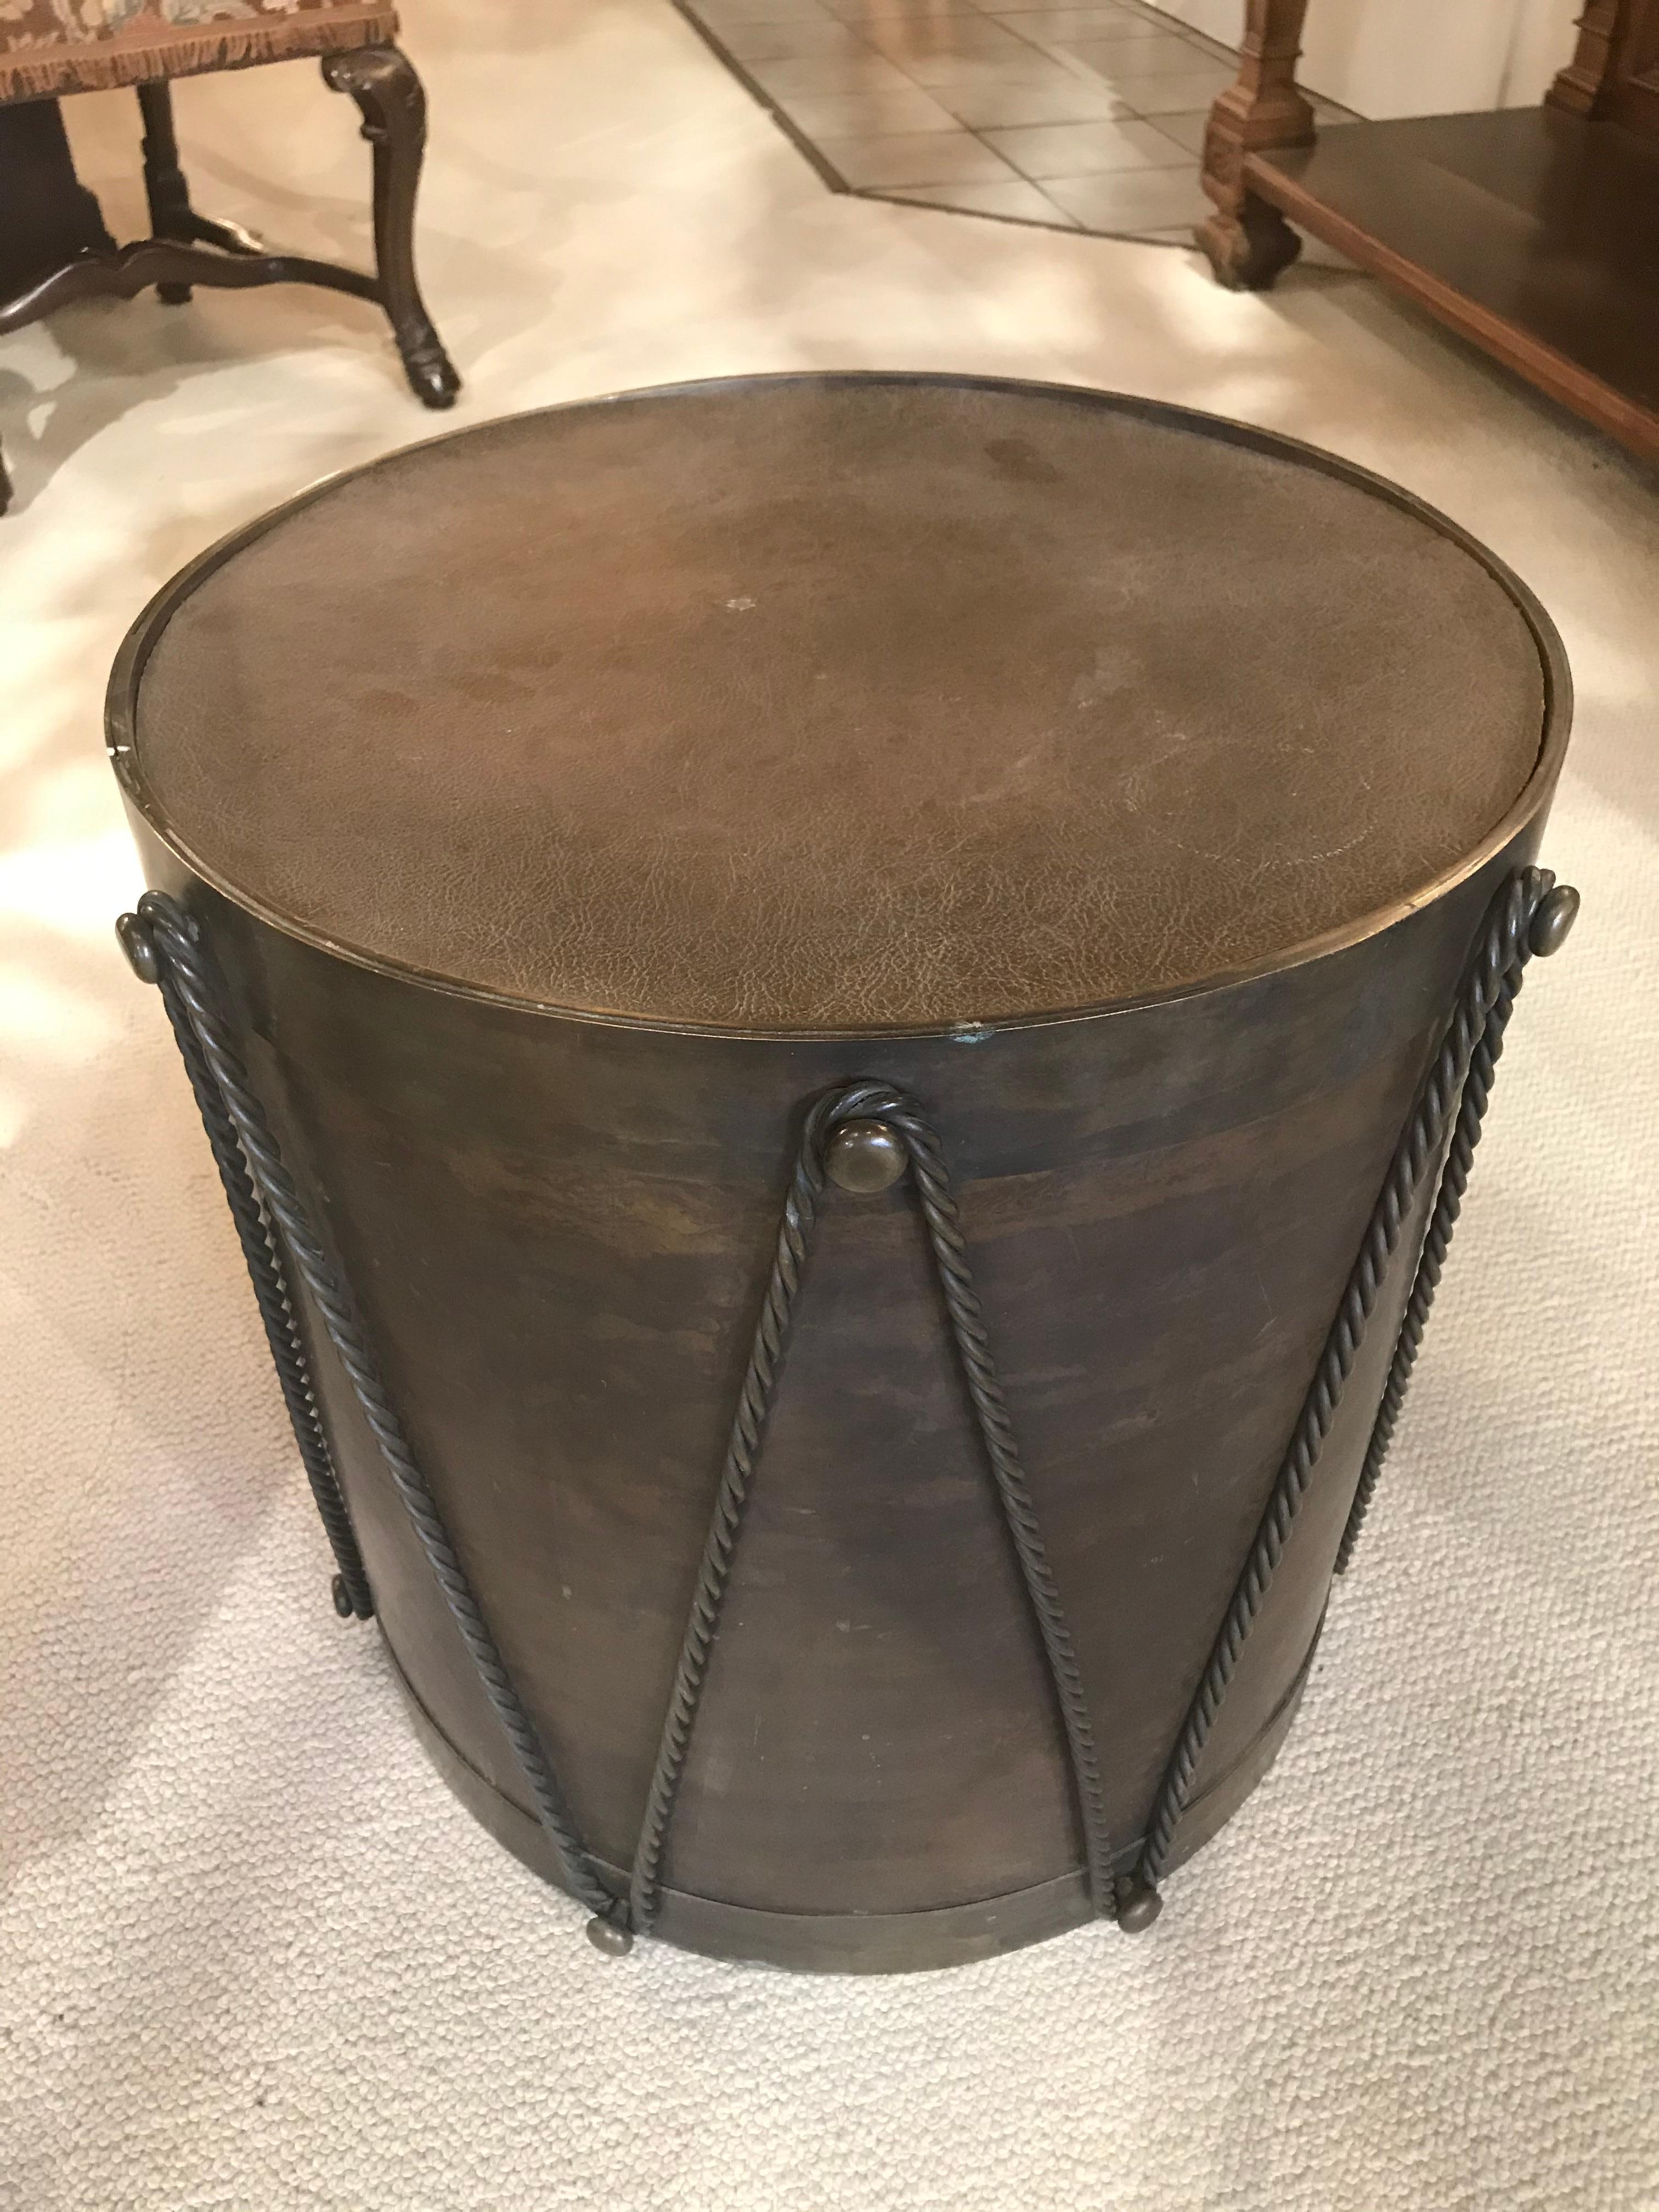 A fine side table imitating a drum, France, circa 1900.
Dimensions: Height 19 3/4